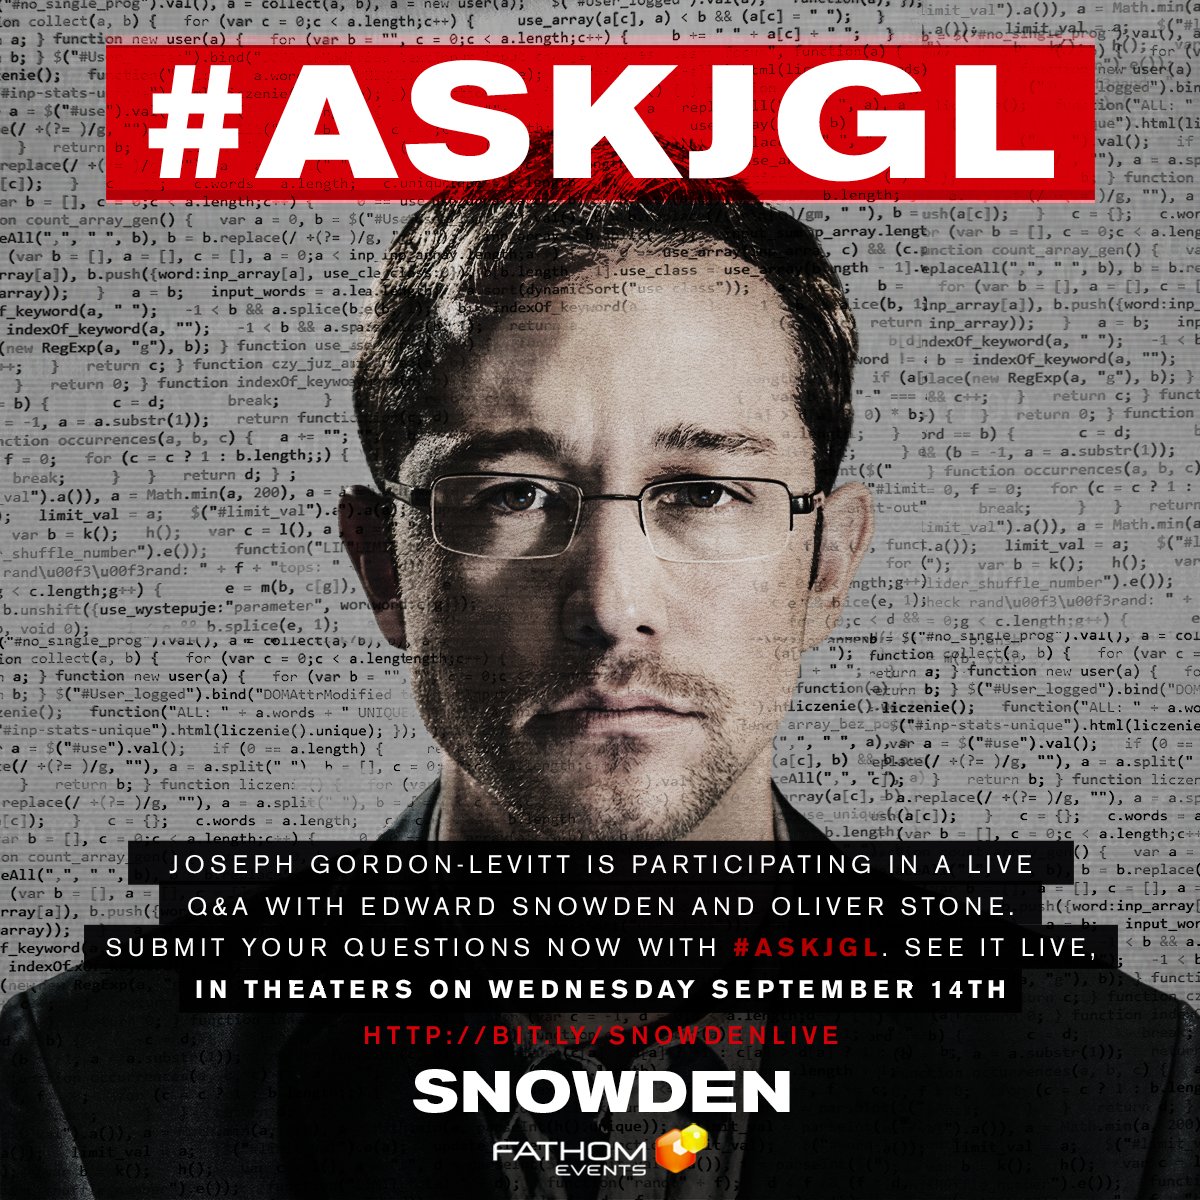 RT @SnowdenTheMovie: Use #AskJGL to ask @hitRECordJoe questions & he will answer during his Q&A w/ @Snowden 9/14. https://t.co/gvFDZoxNsi h…